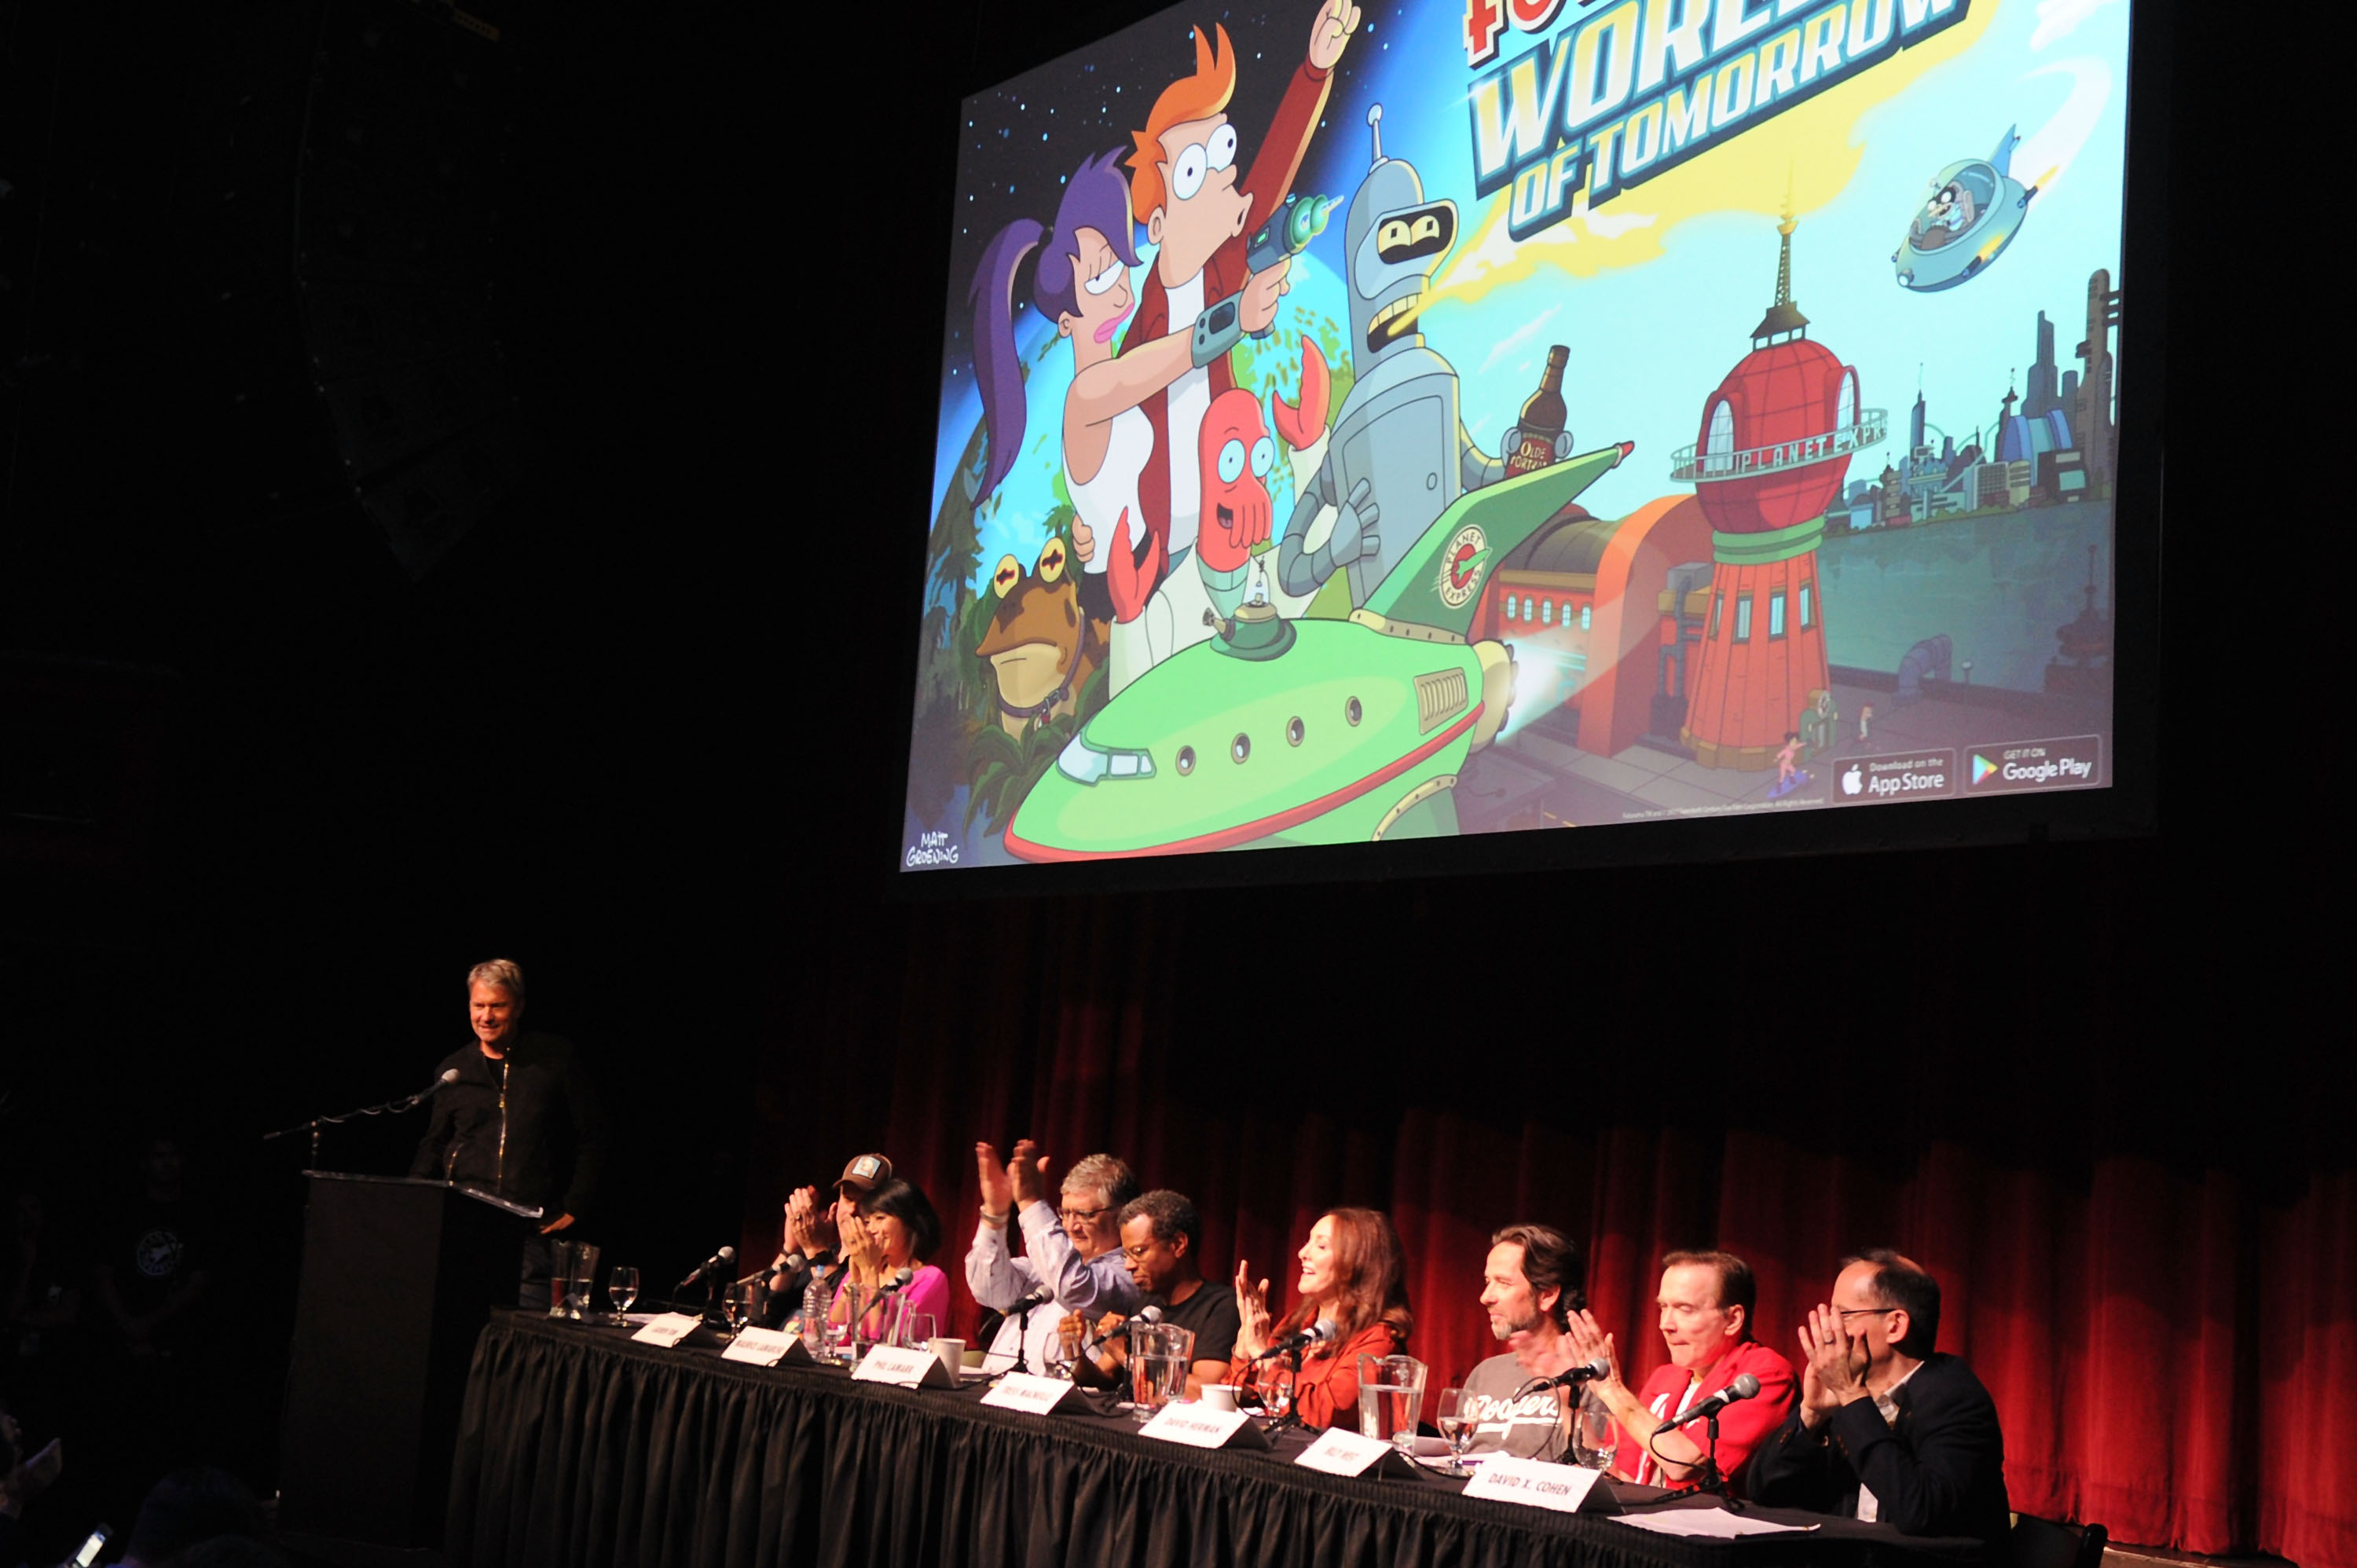 'Futurama,' rebooted on Hulu, features its cast participating in a question and answer panel at Comic Con.